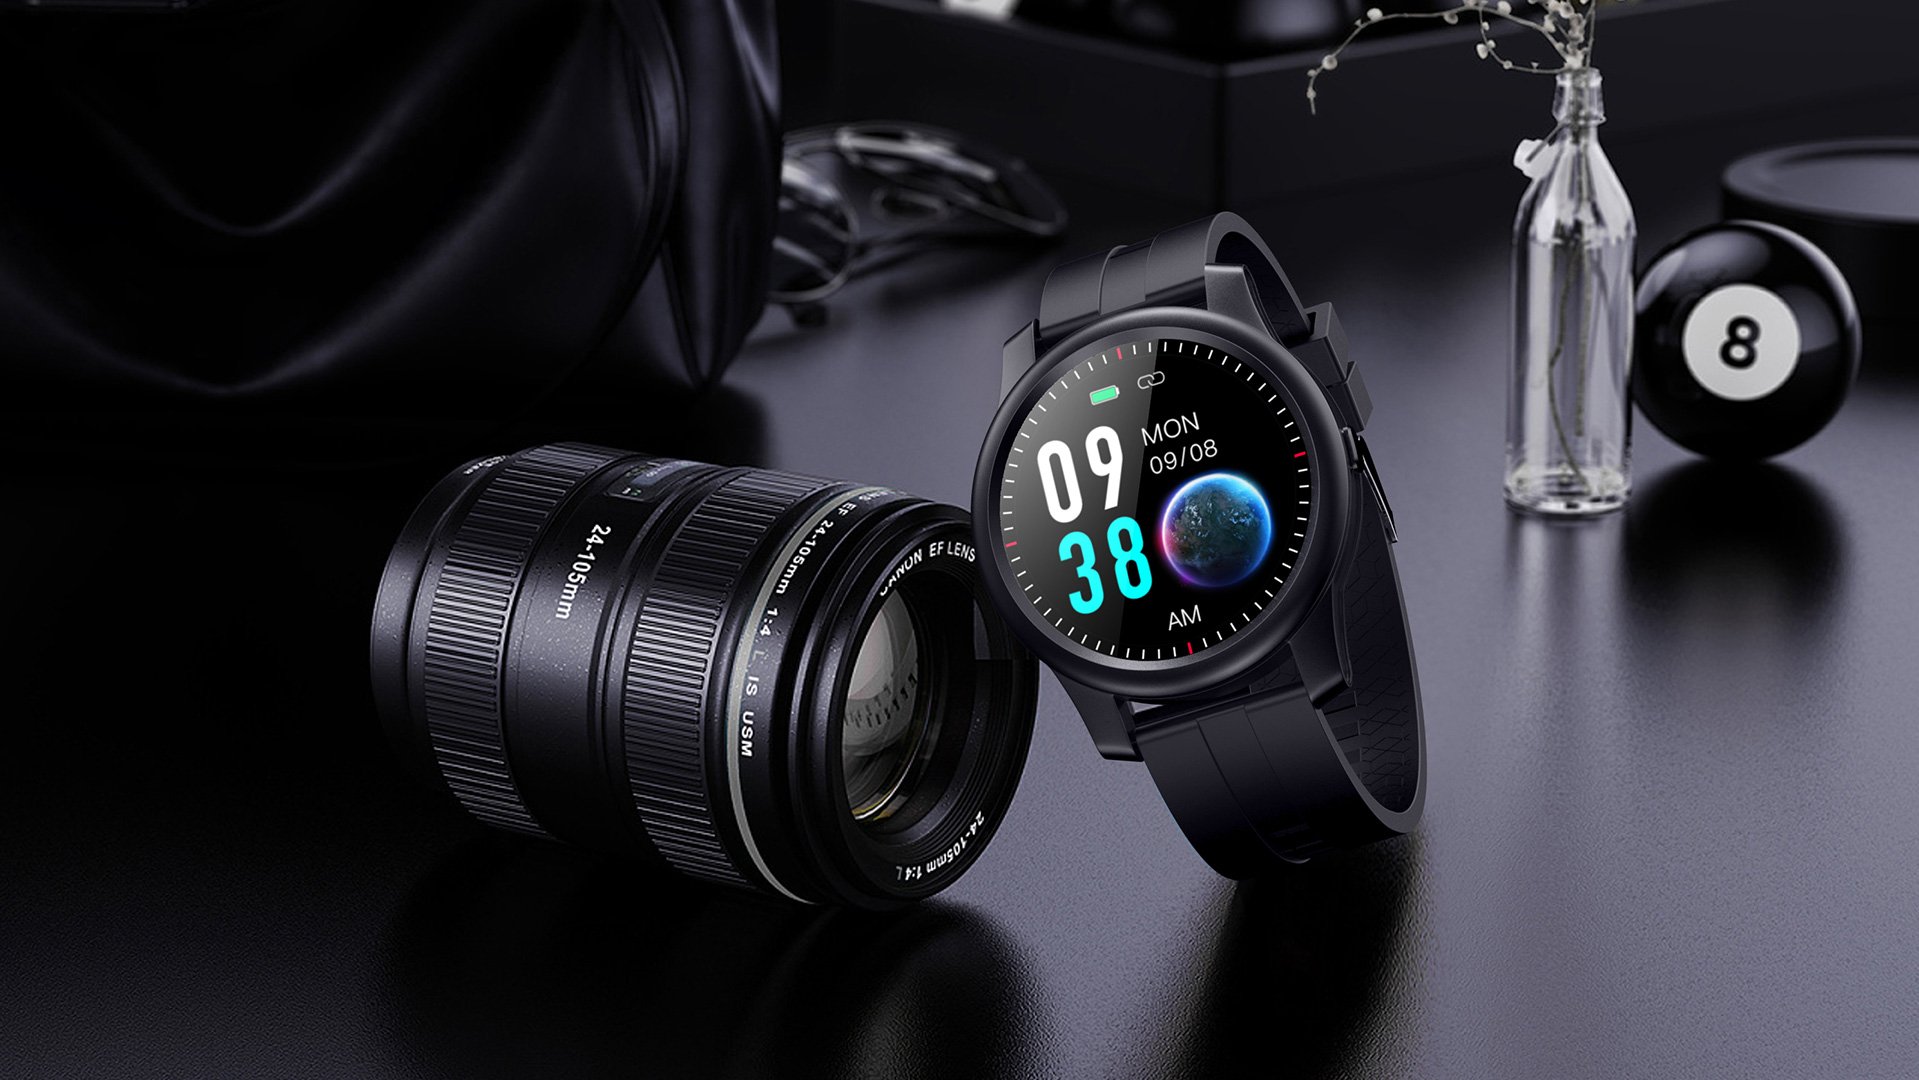 Elephone R8 Smartwatch is Available in Black & Silver Colors for $39.99